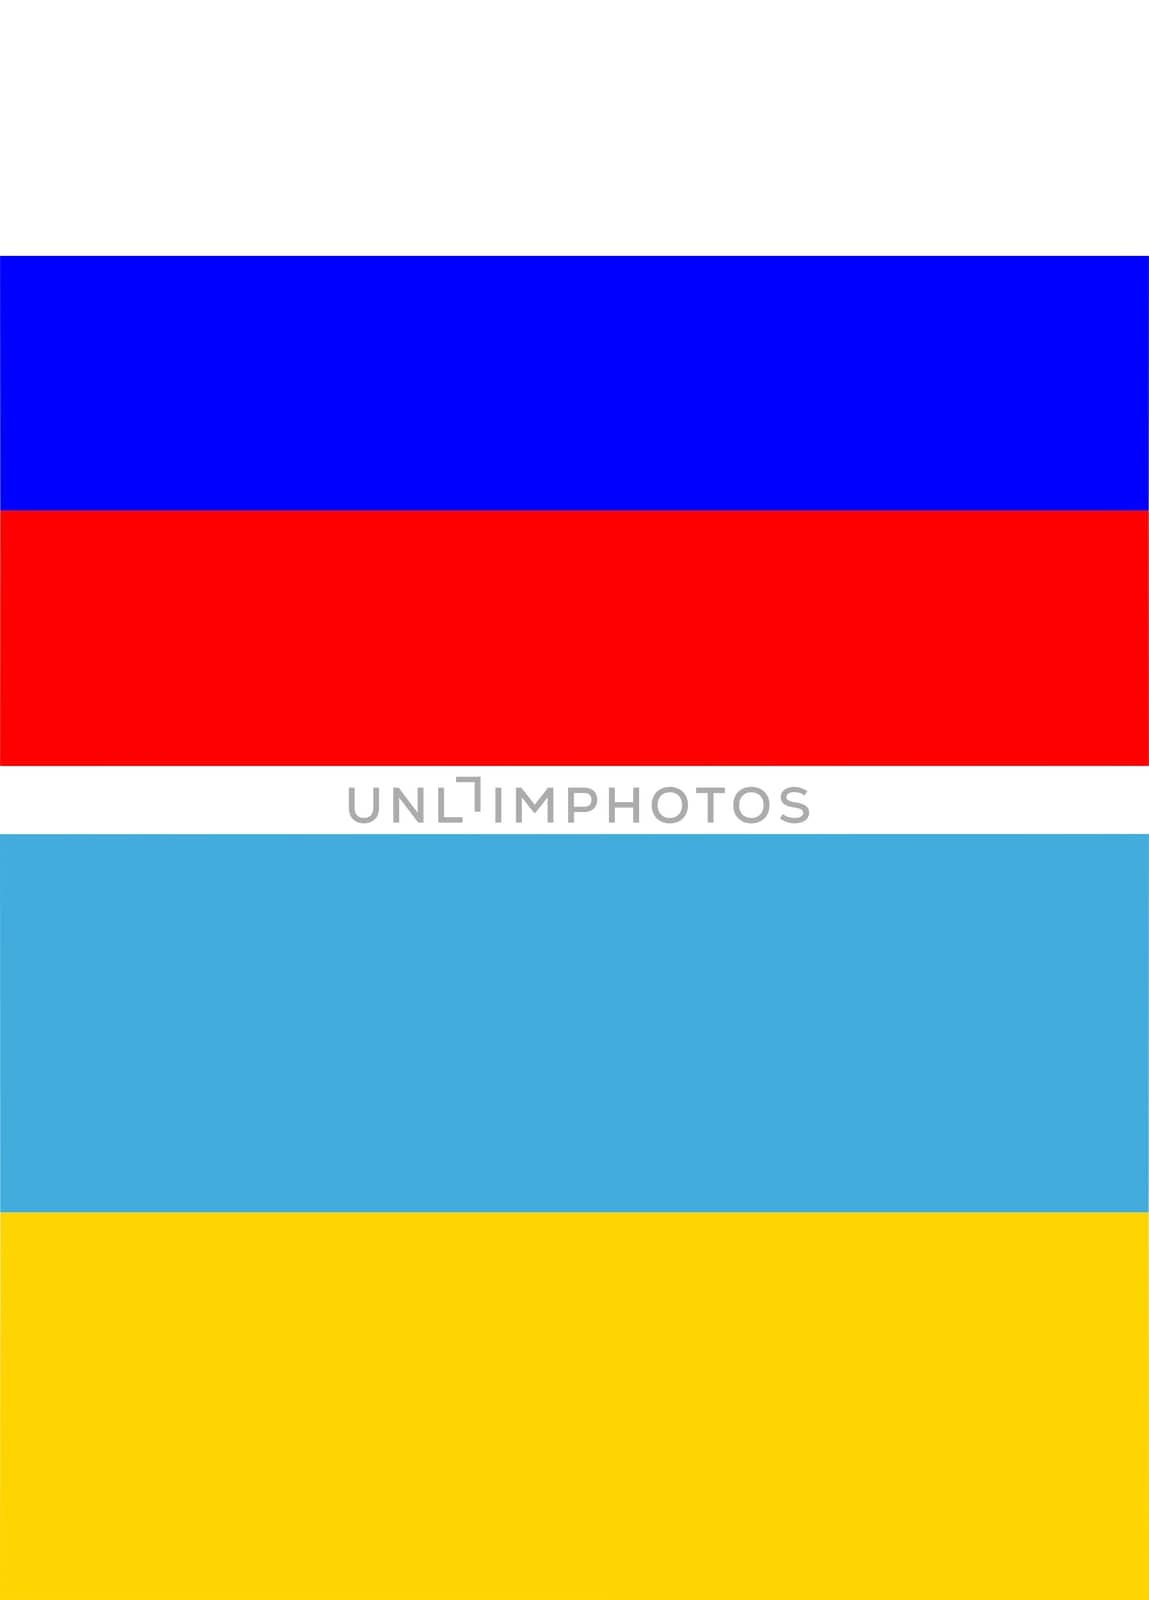 Russia and Ukraine flags by paolo77